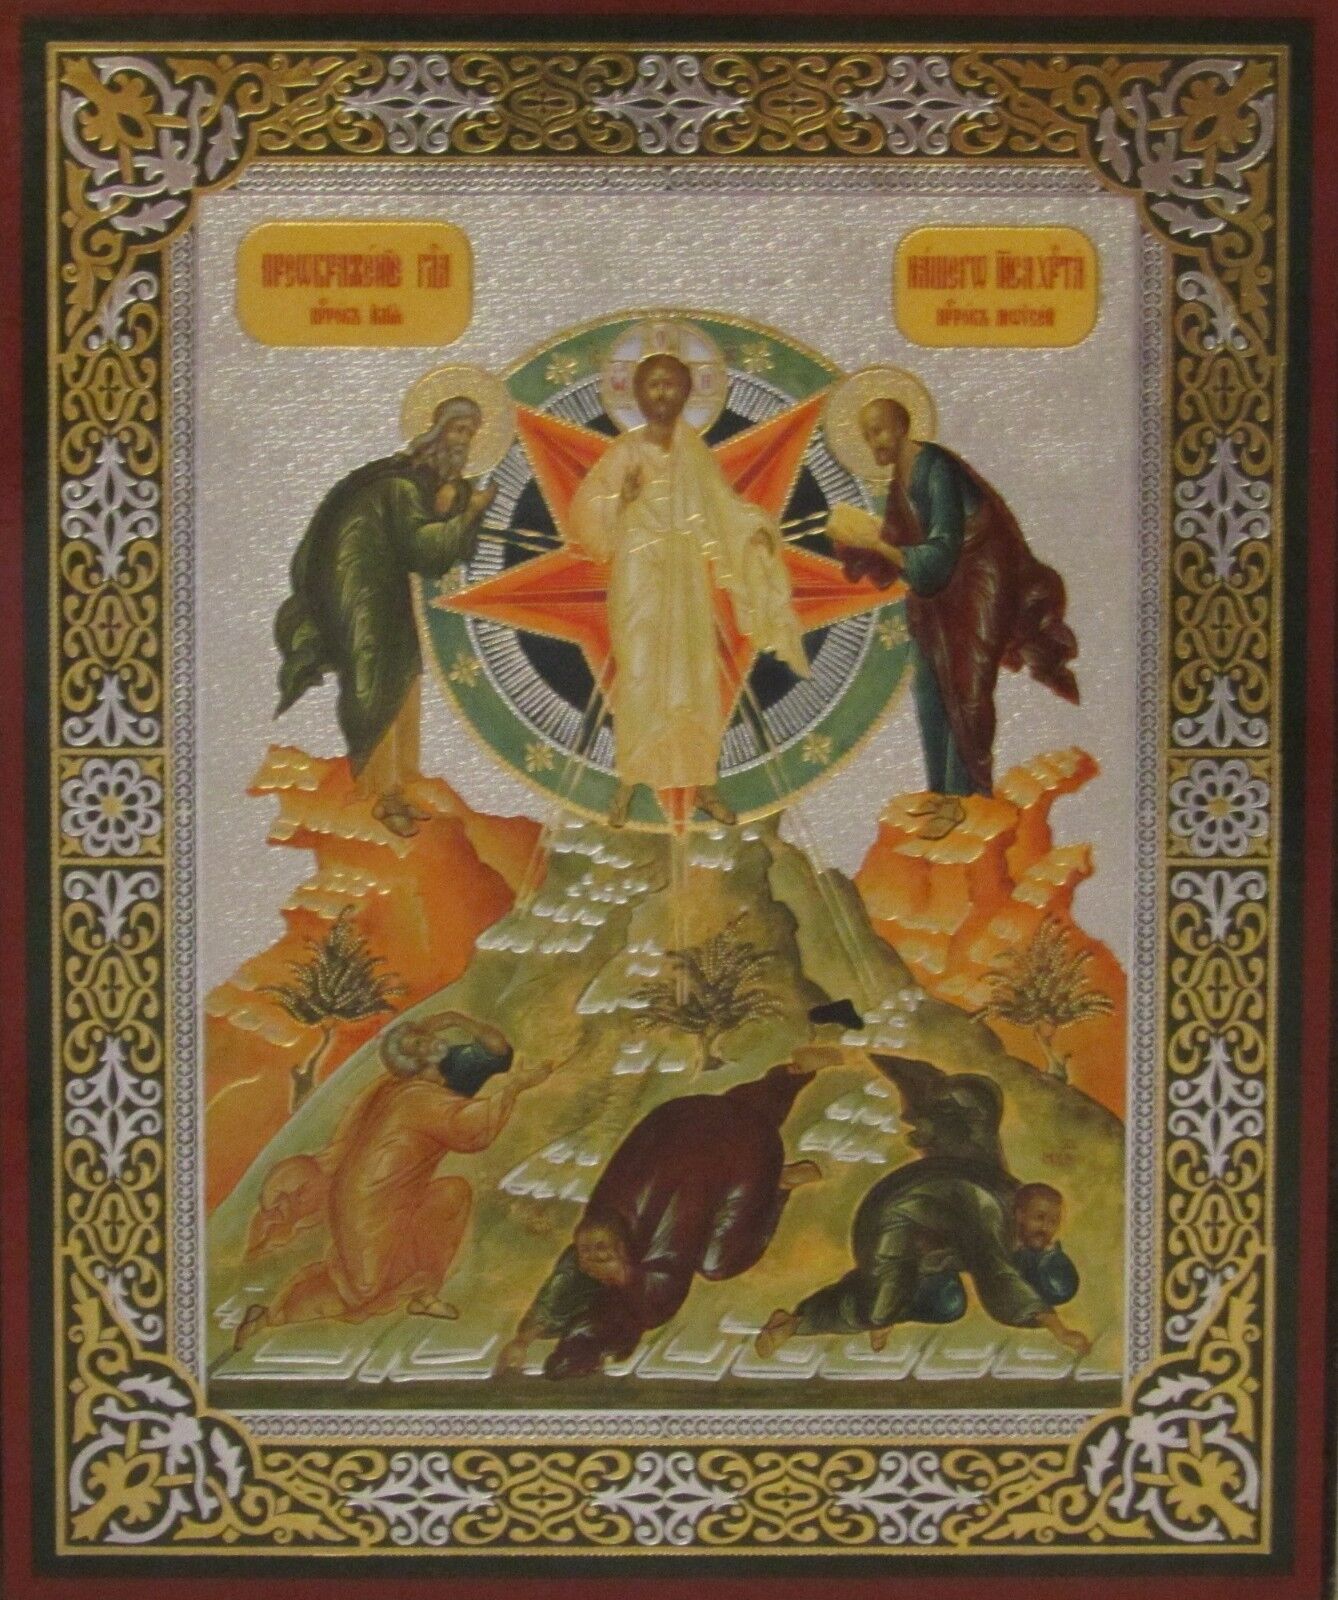 Transfiguration of our Lord - Authentic Russian Icon on Wood - Christian Gift